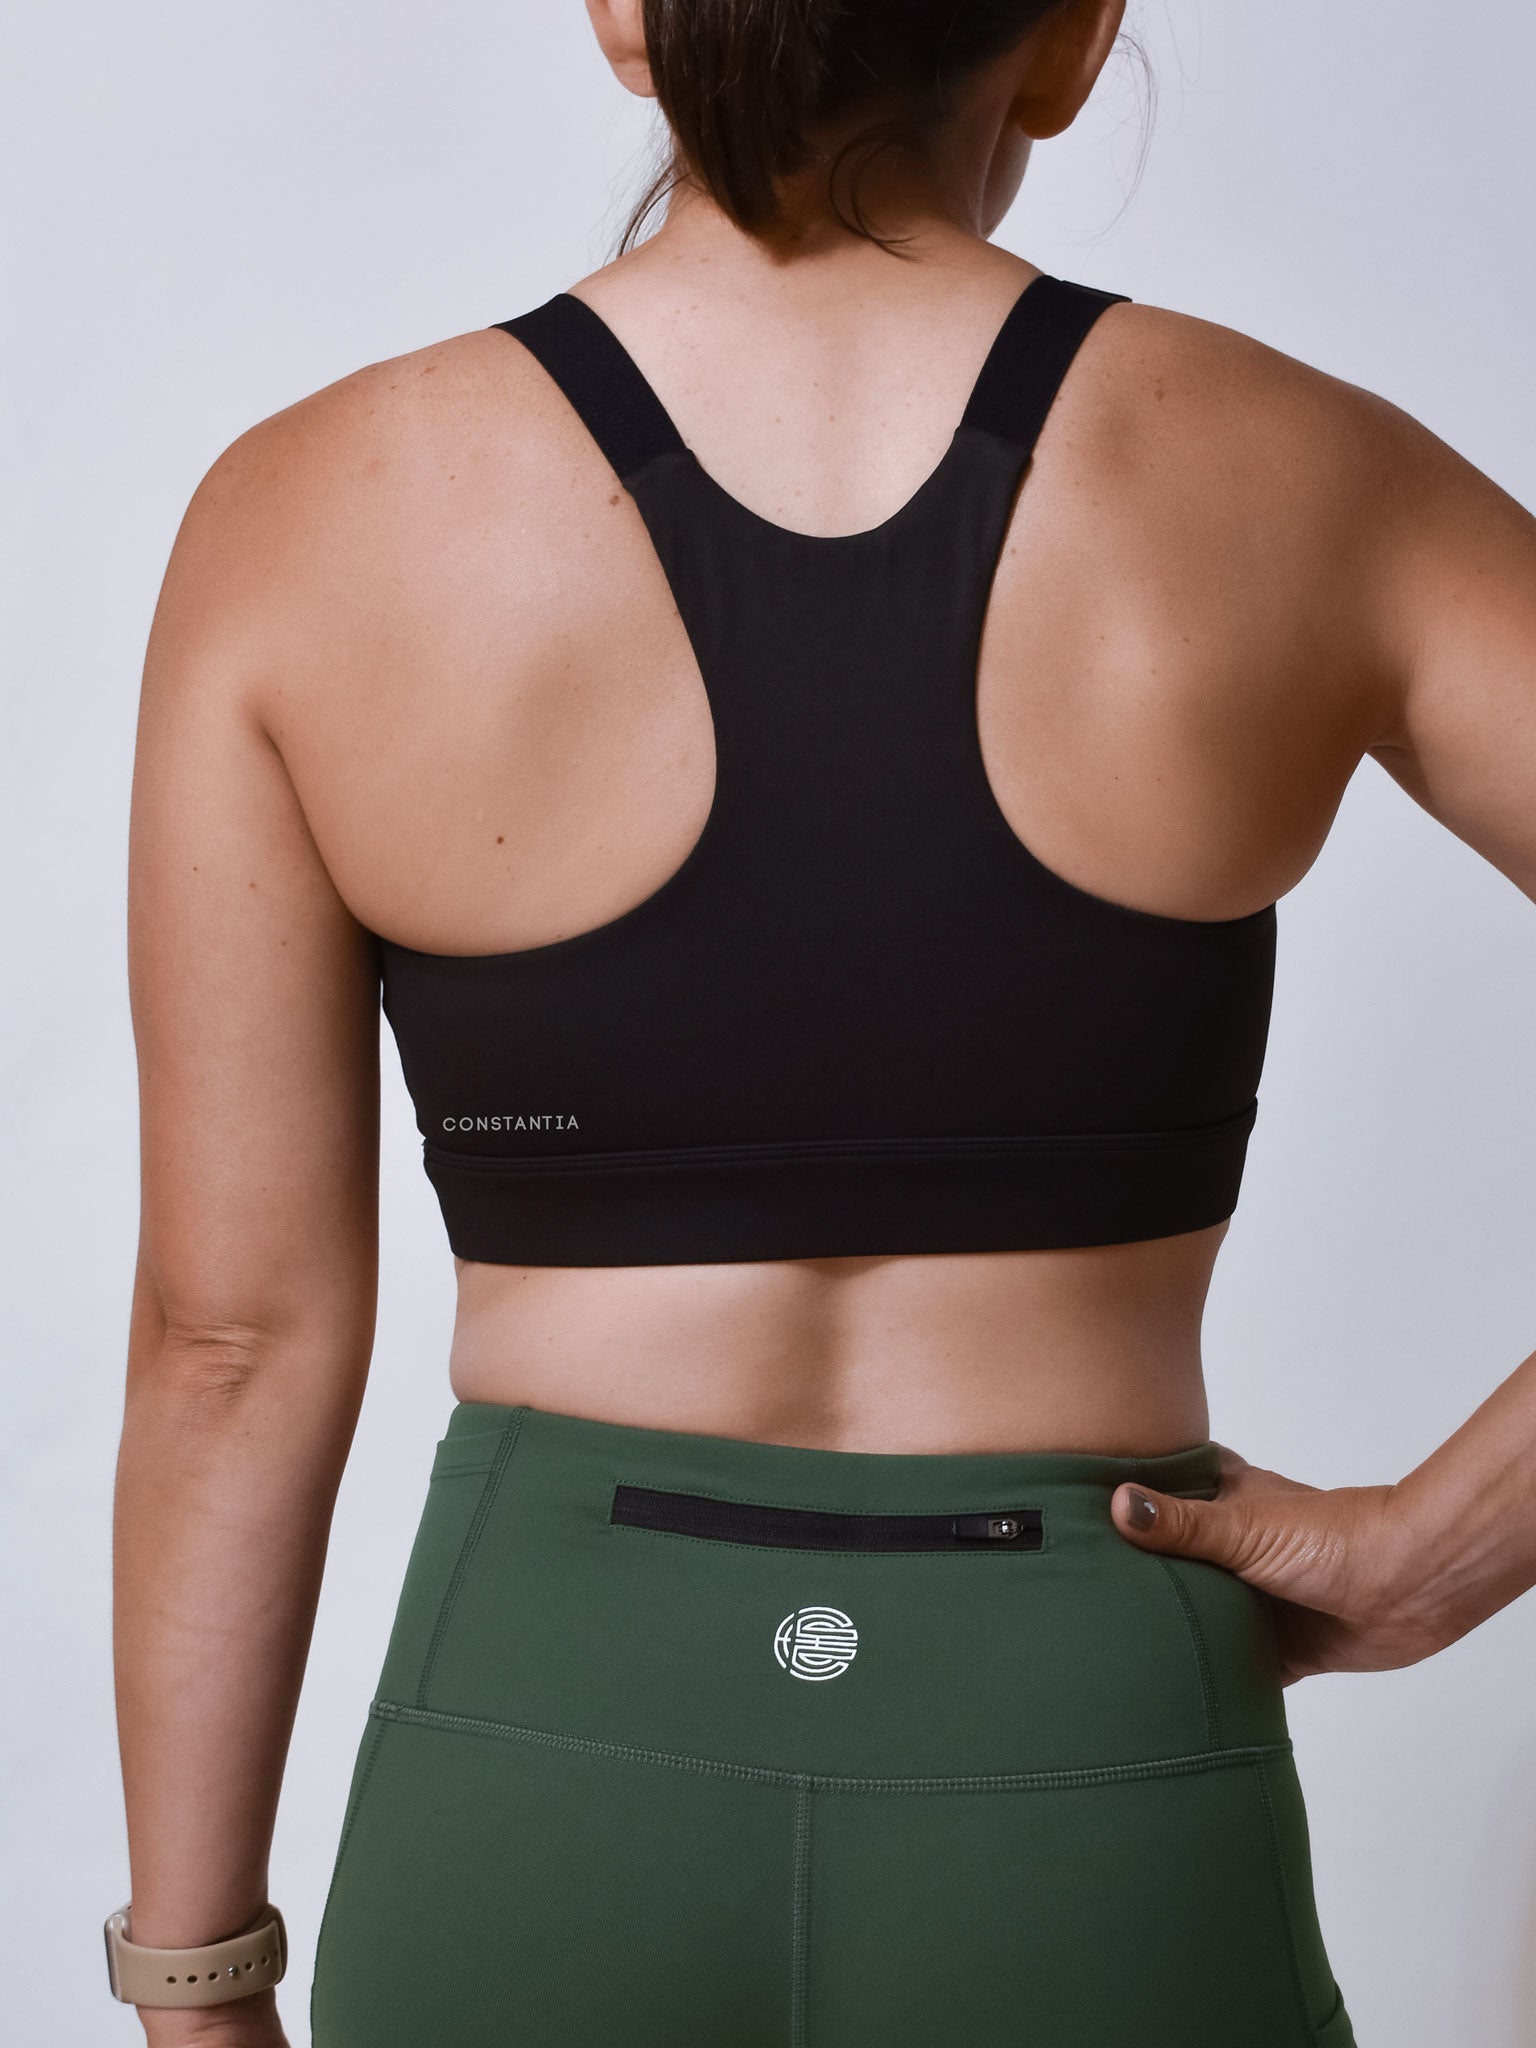 Review of Dalia sportowy 70J: The time I ordered a sports bra